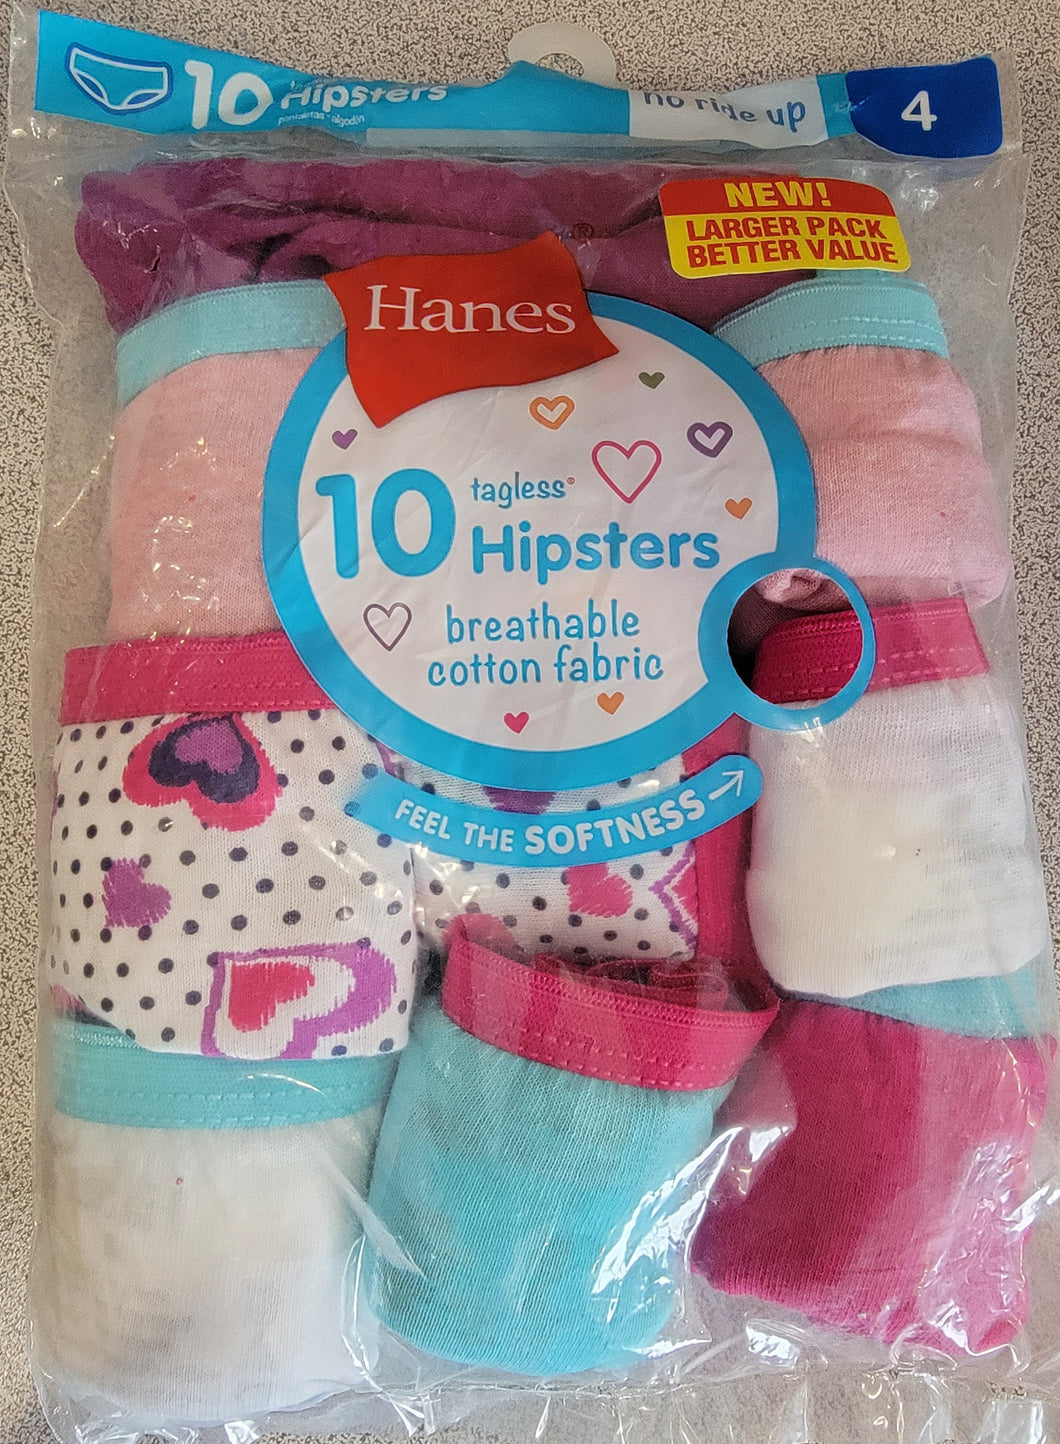 Hanes Girls Soft Tagless Hipsters - Size 4, 10-Pack